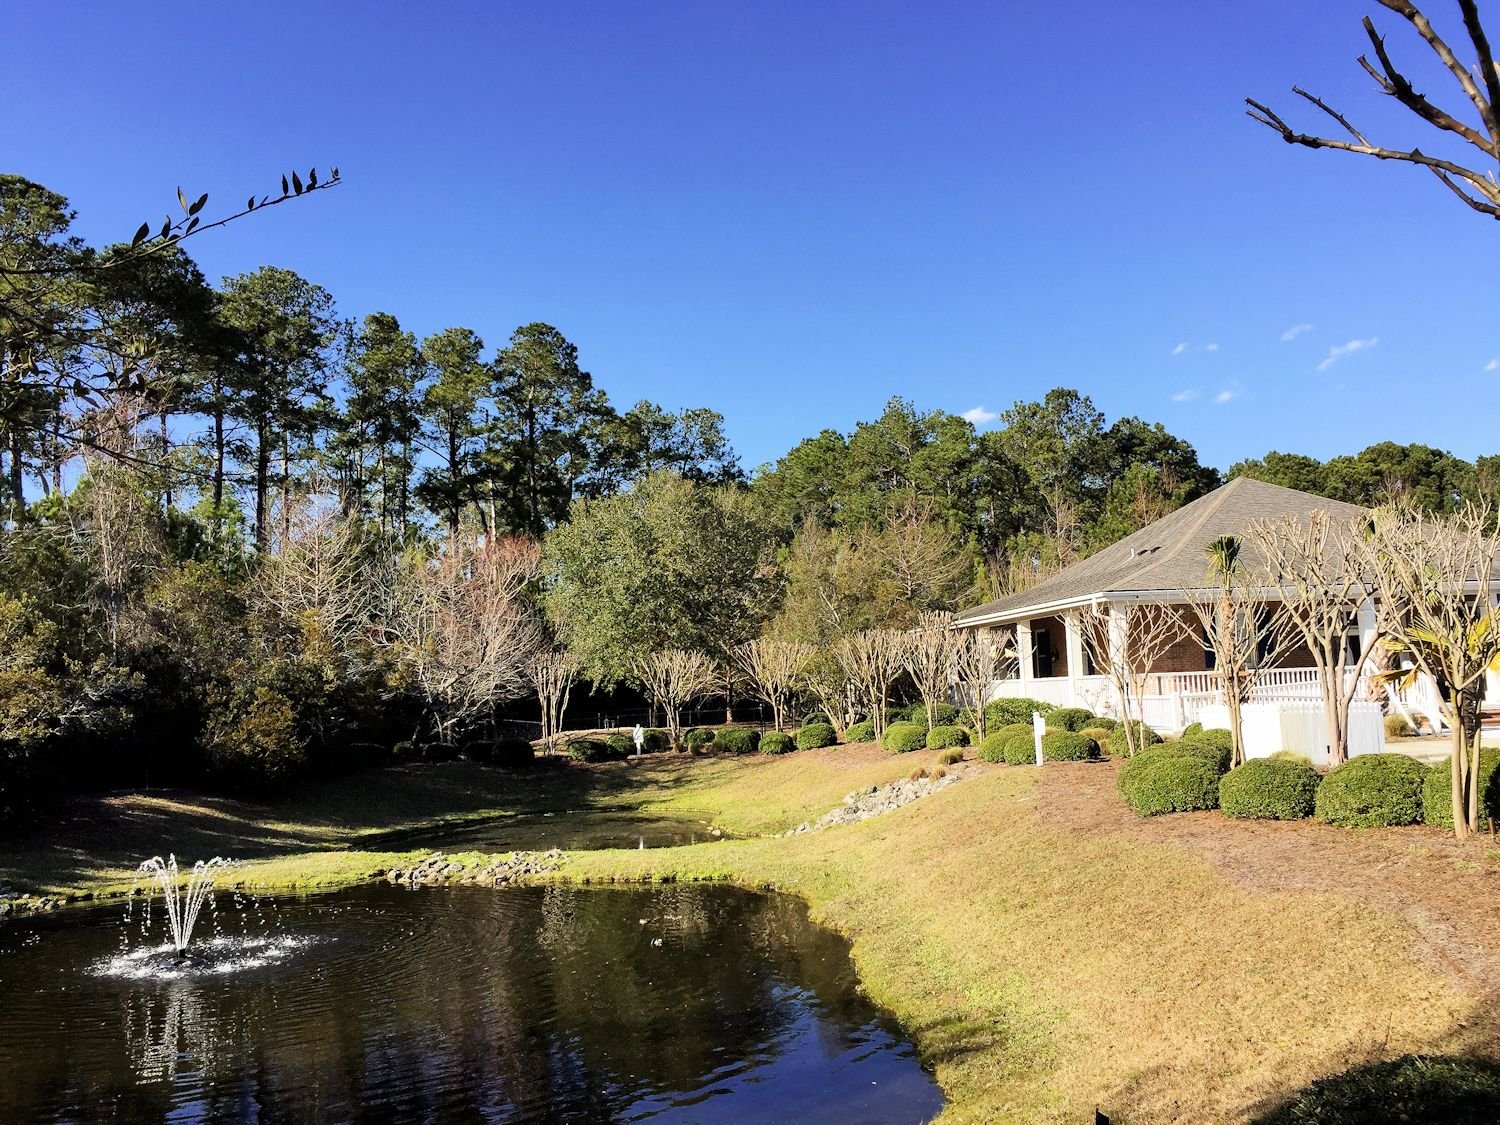 Marsh-Oaks-Clubhouse-and-Pond.jpg